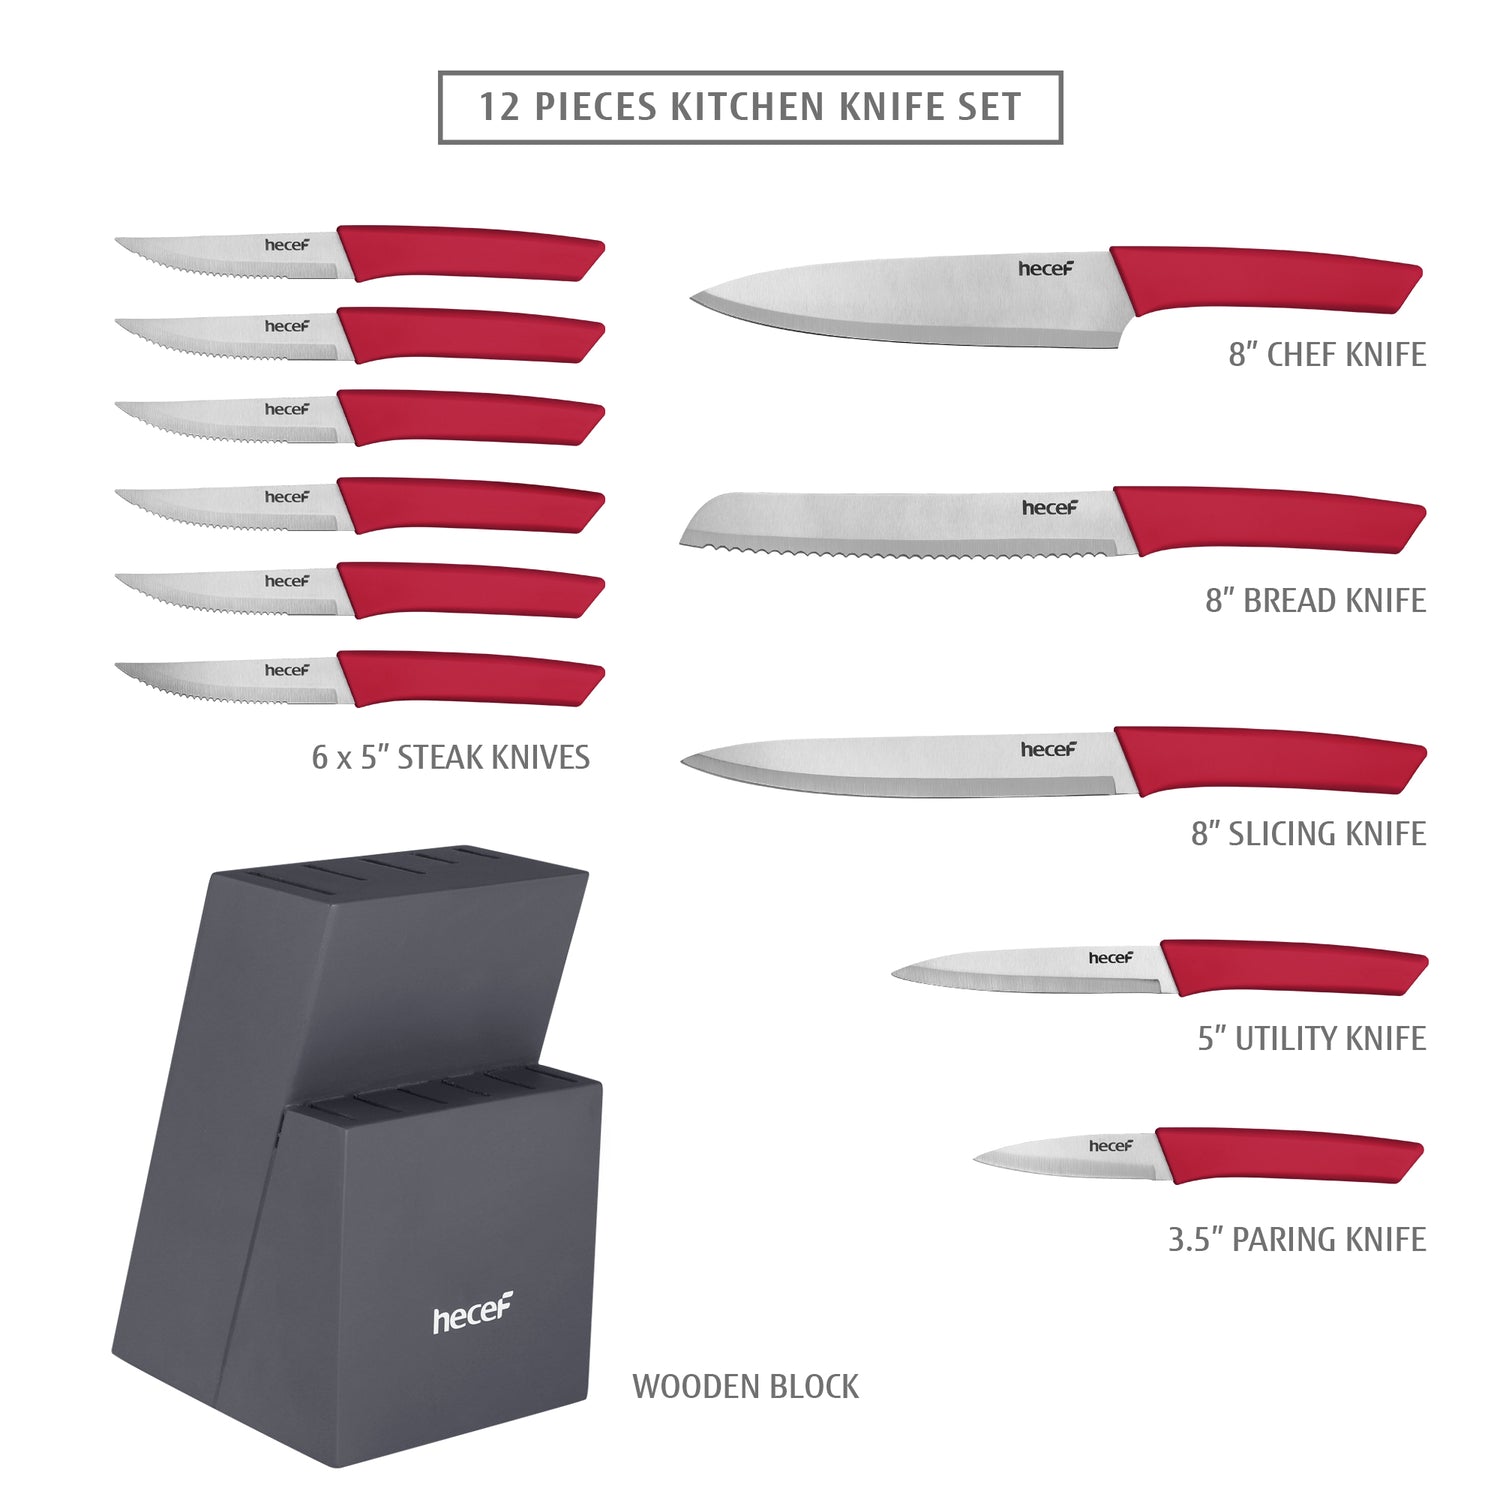 Hecef 12 Pieces Kitchen Knife Block Set,Knife Set with Wooden Block & Steak Knives Set, Lightweight and Strong High Carbon Stainless Steel Cutlery Set, Extended Handle Design - Hecef Kitchen